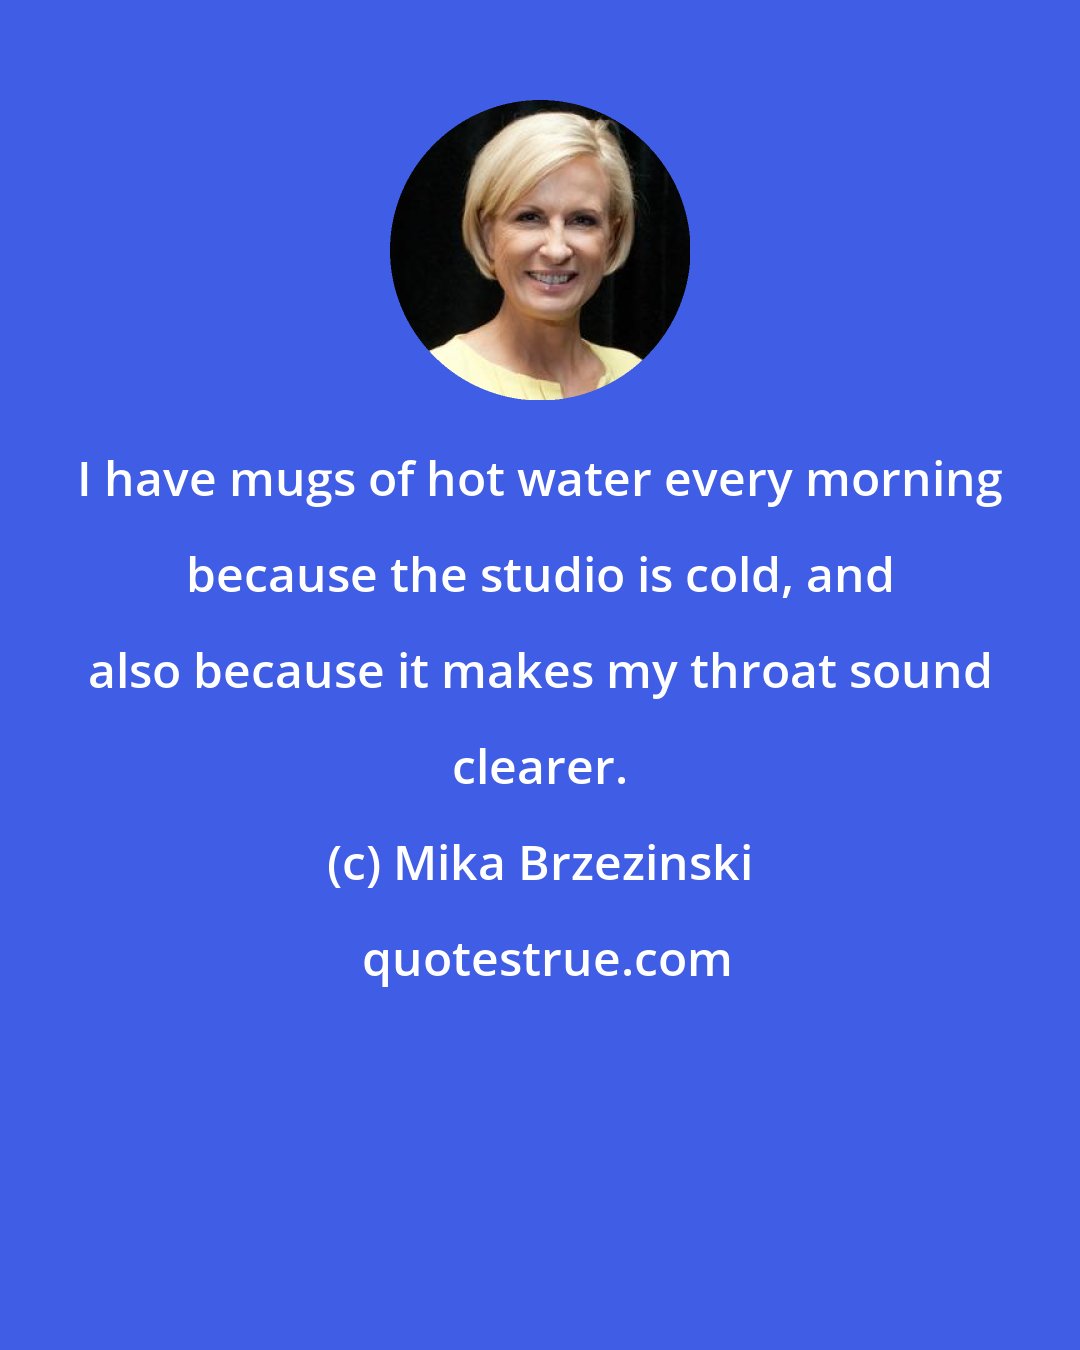 Mika Brzezinski: I have mugs of hot water every morning because the studio is cold, and also because it makes my throat sound clearer.